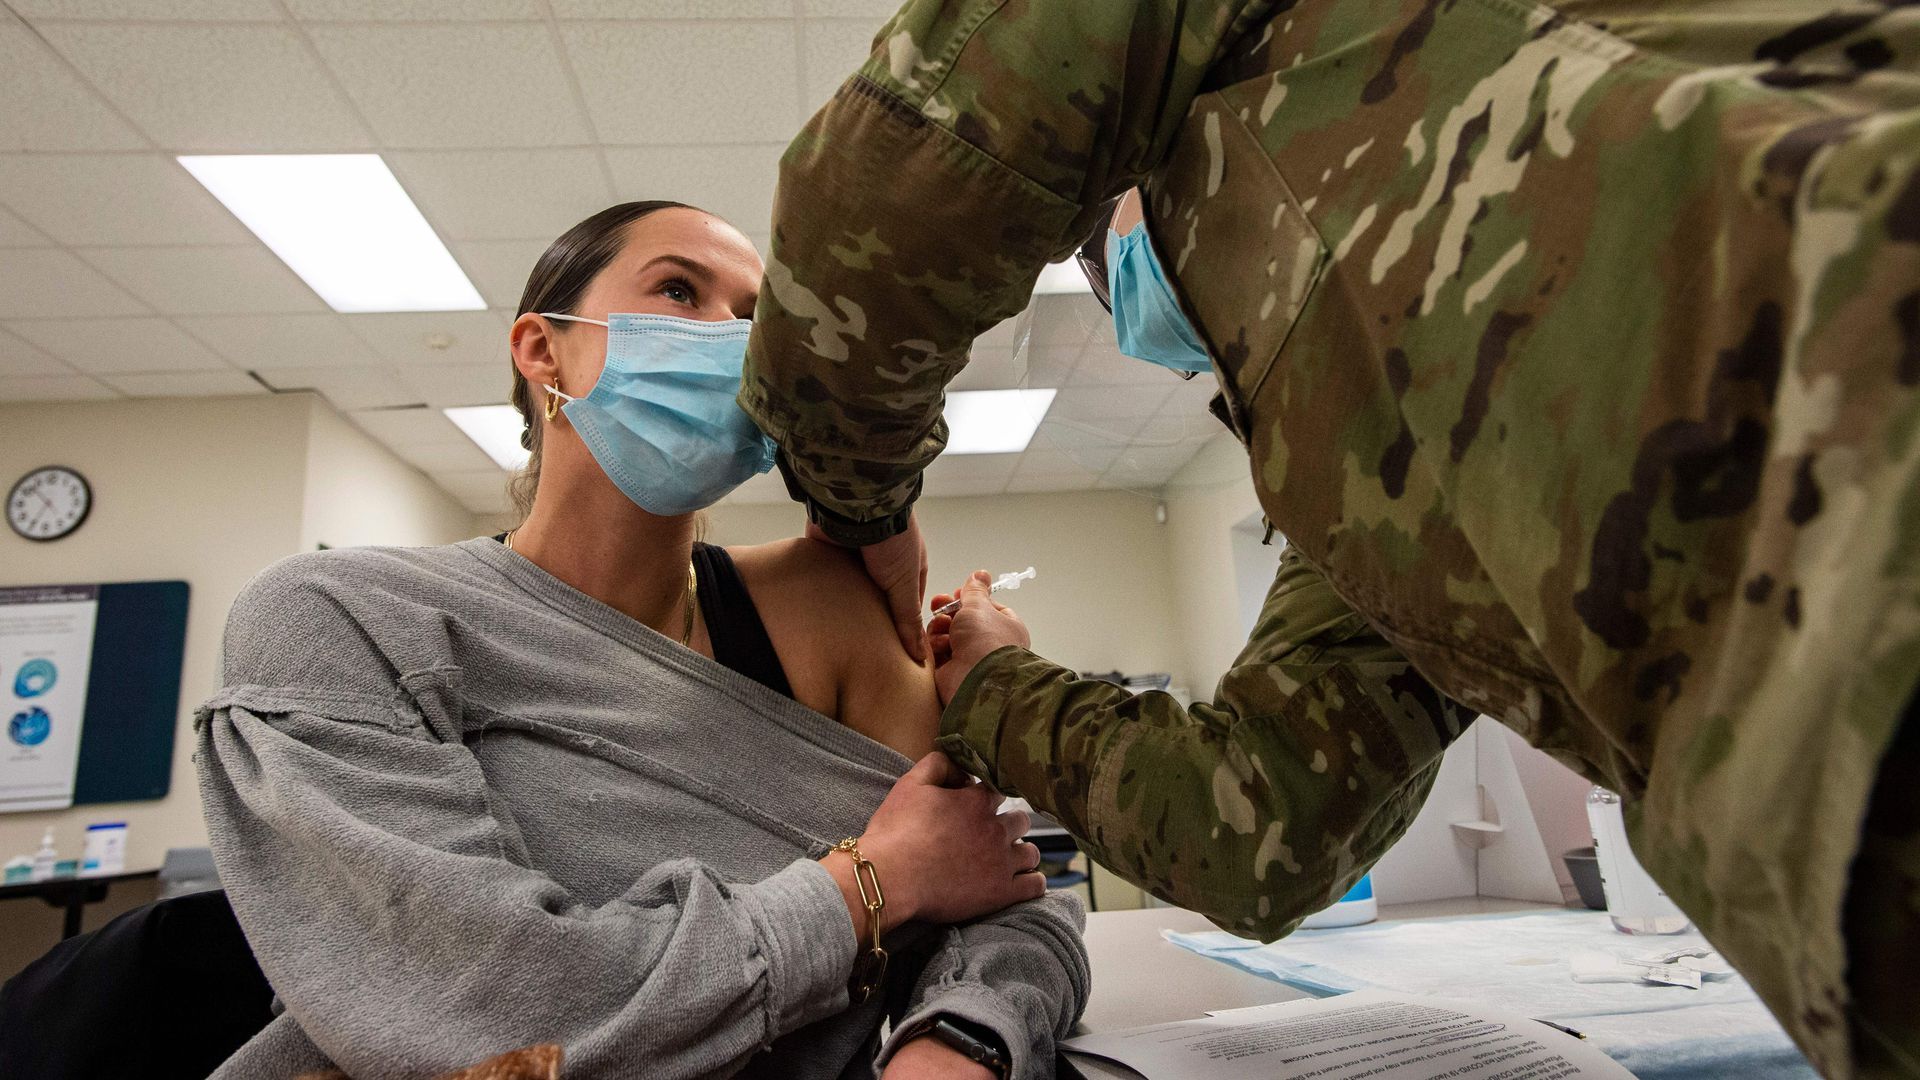 A woman receives a COVID-19 vaccine from a U.S. service member in Boston on Feb. 16.